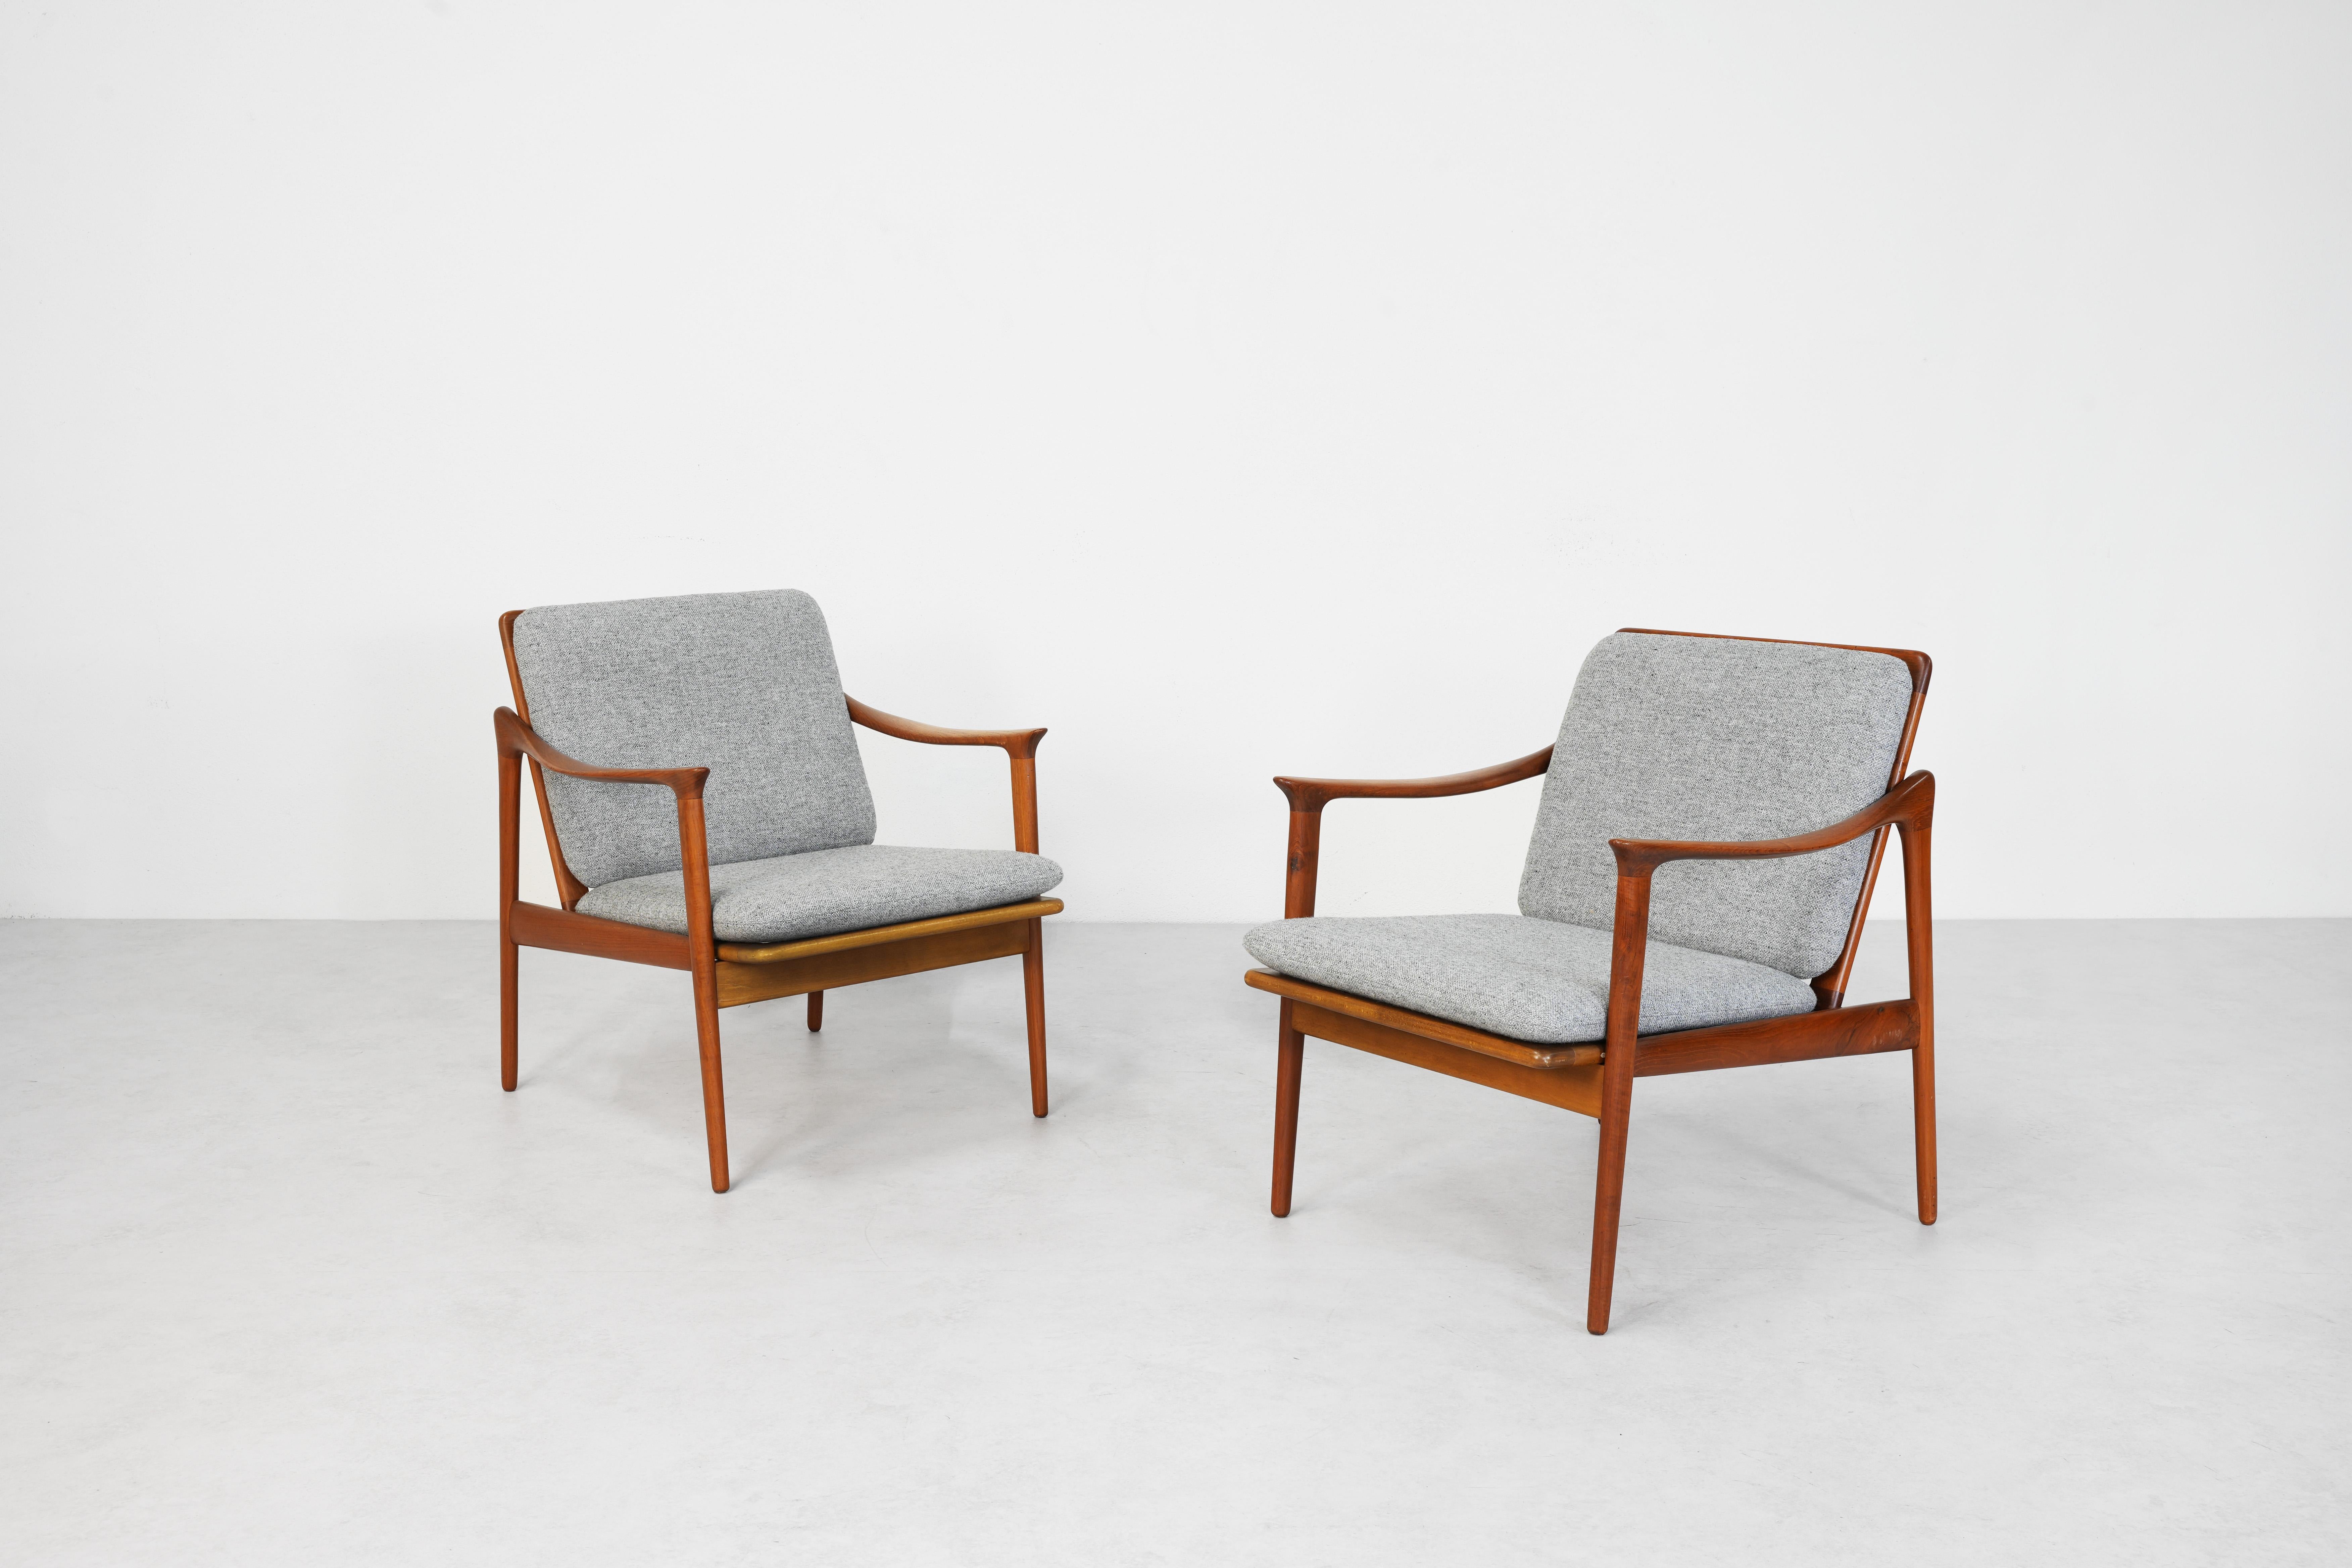 Teak Pair of Lounge Easy Chairs by Frederik Kayser for Vatne Mobler, Norwary 1960ies For Sale